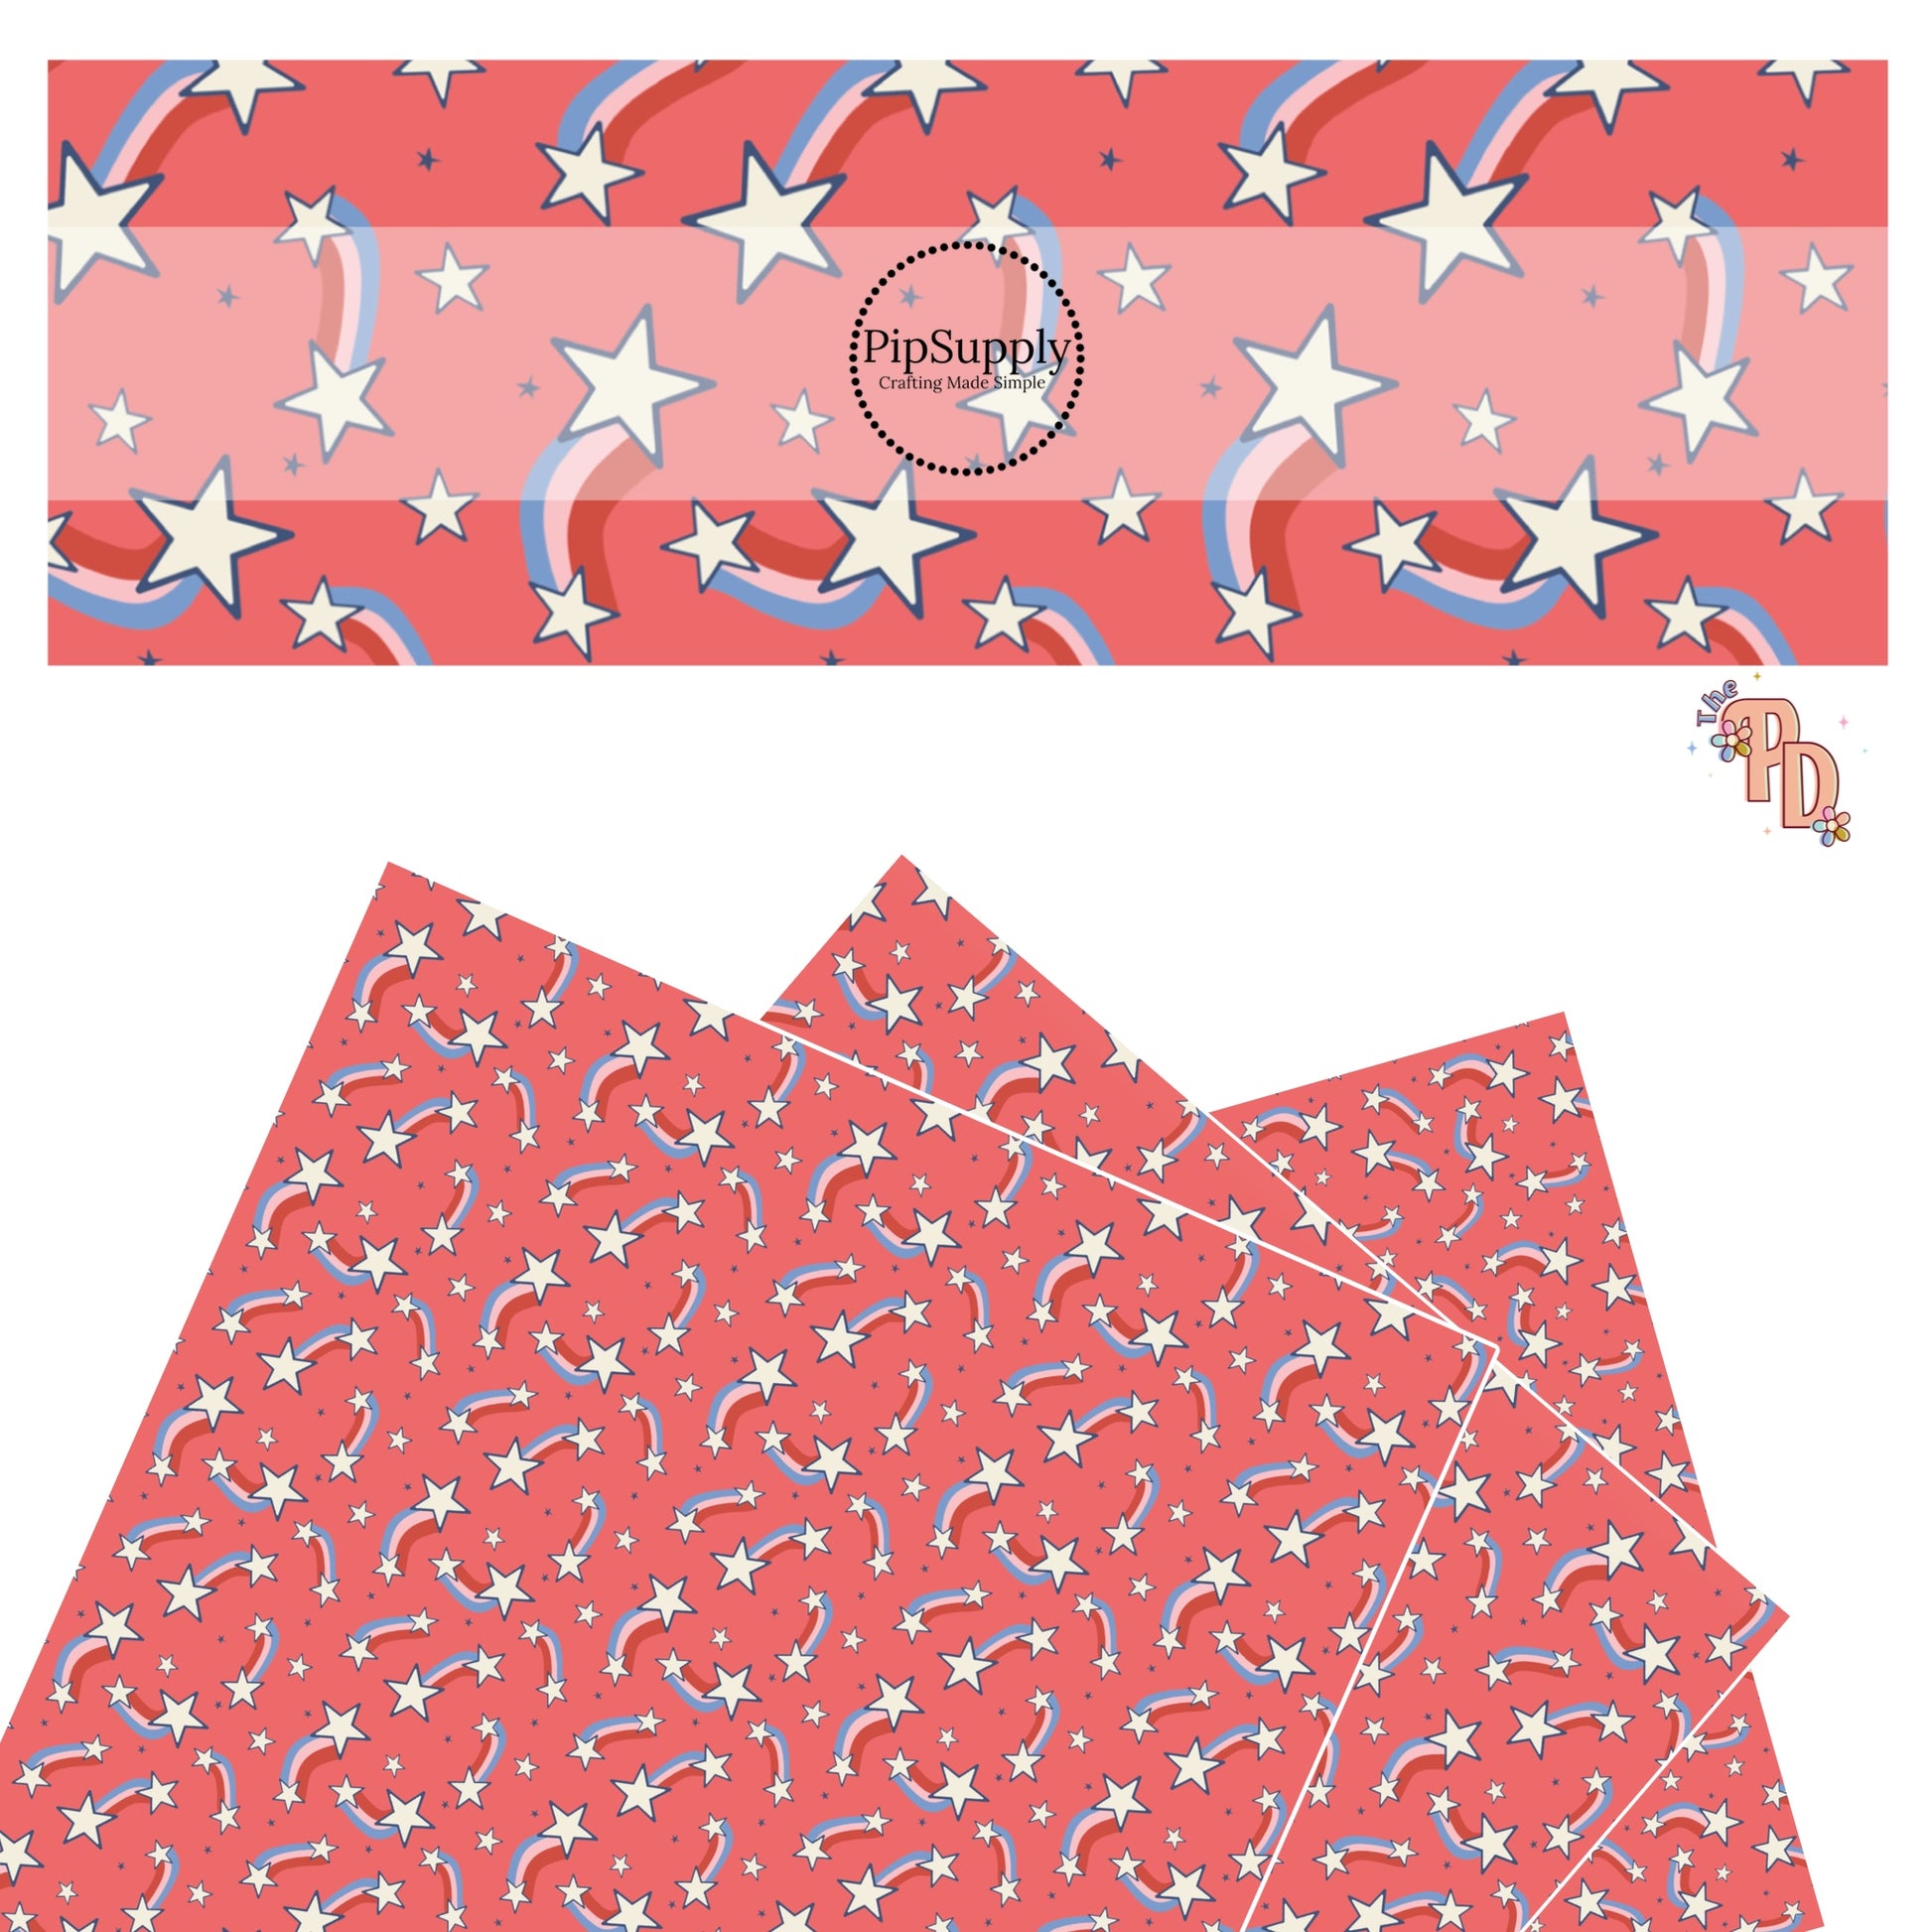 Blue, Red, Pink Rainbows With White Stars On Red Faux Leather Sheet